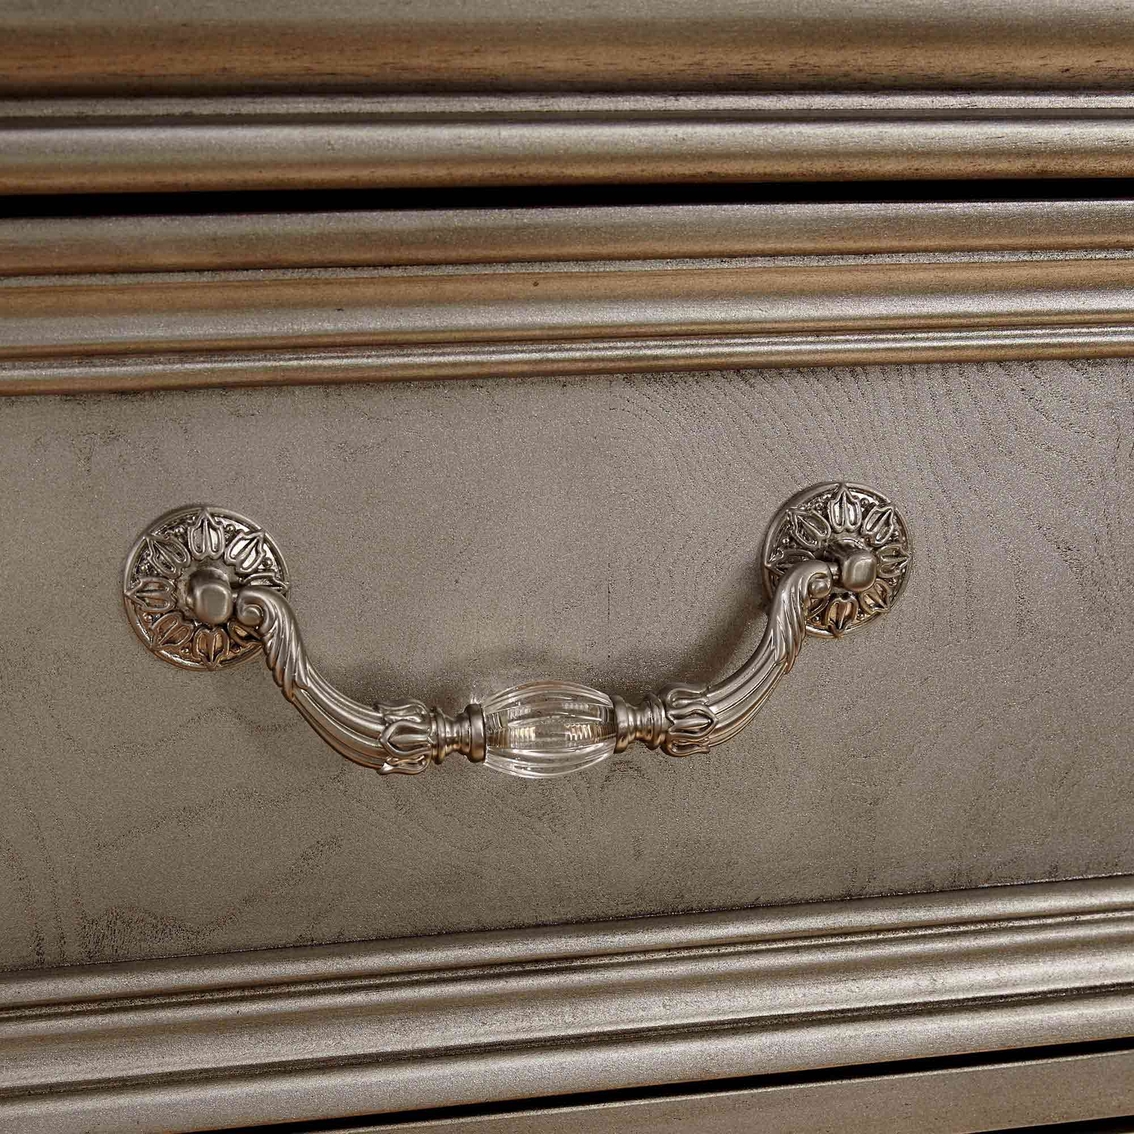 Signature Design by Ashley Birlanny 5 Drawer Chest - Image 2 of 4